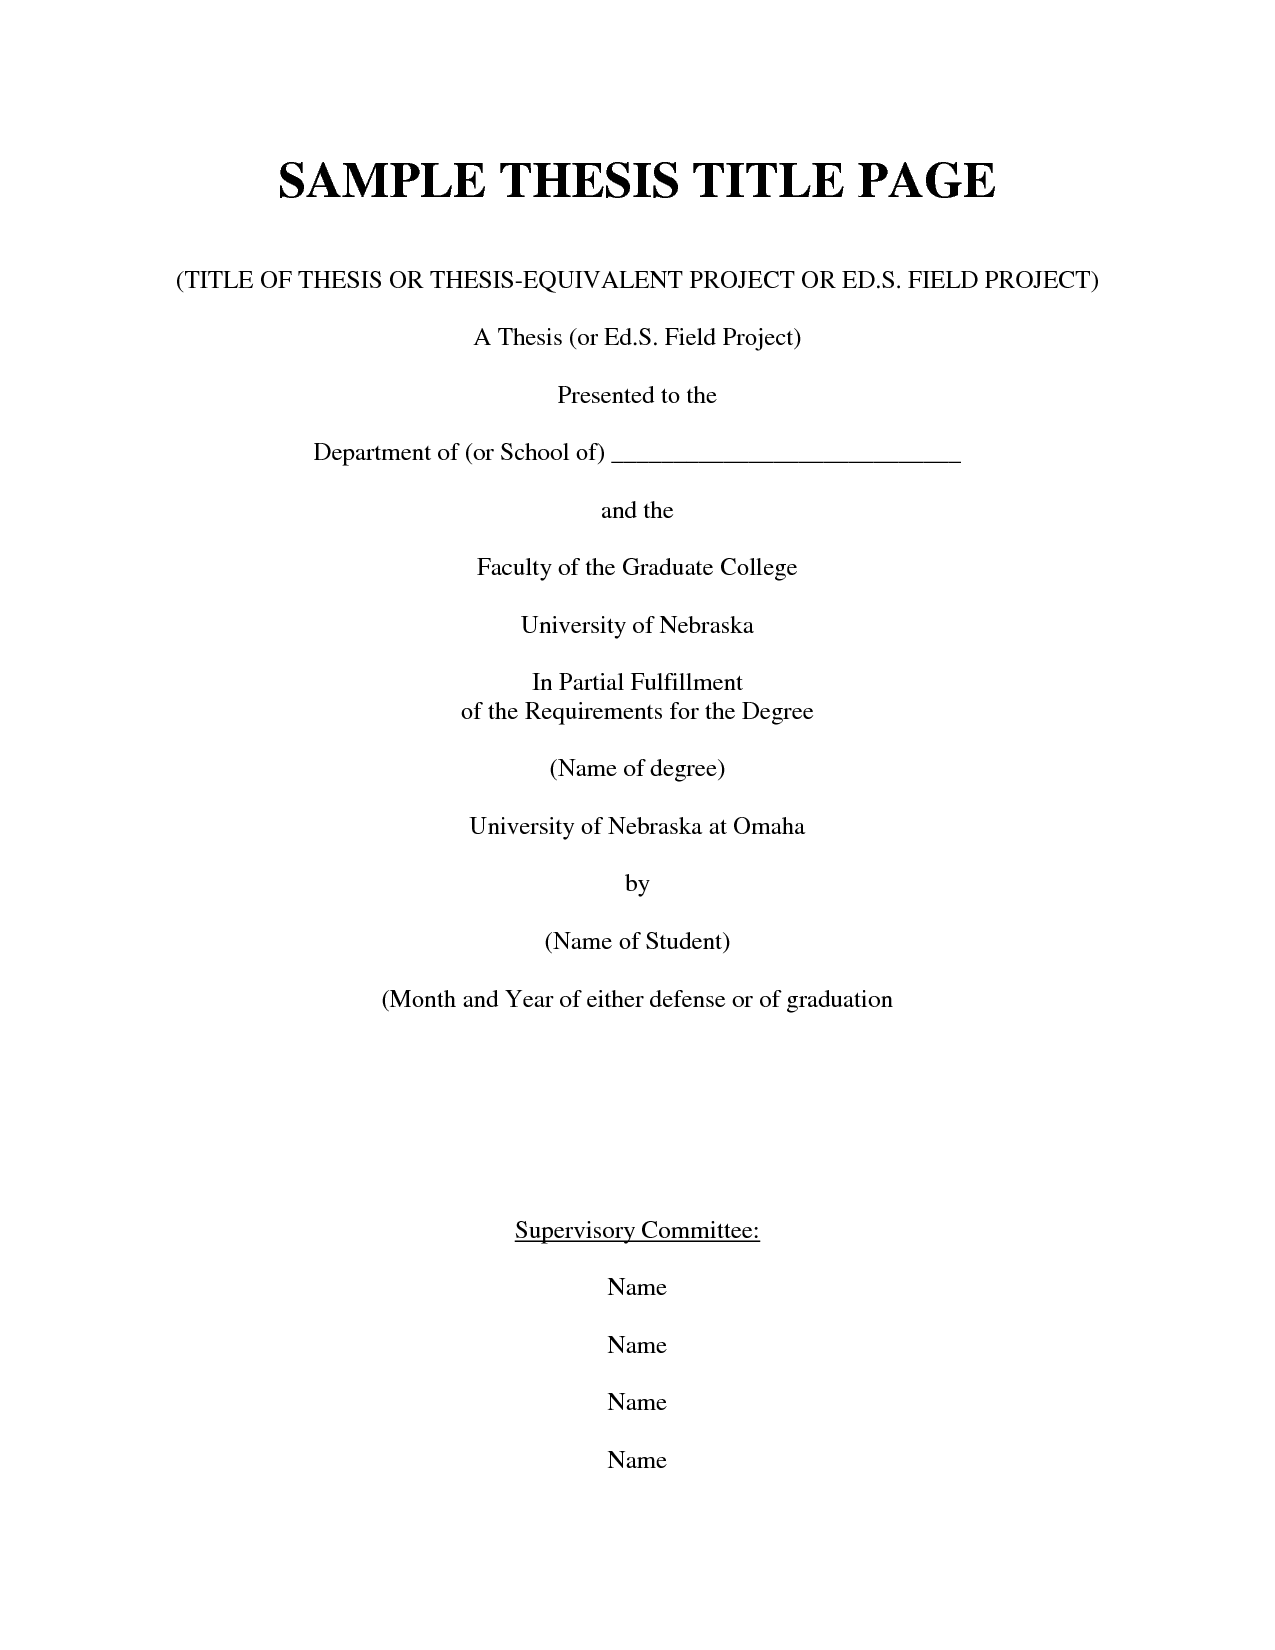 Phd thesis in microsoft word